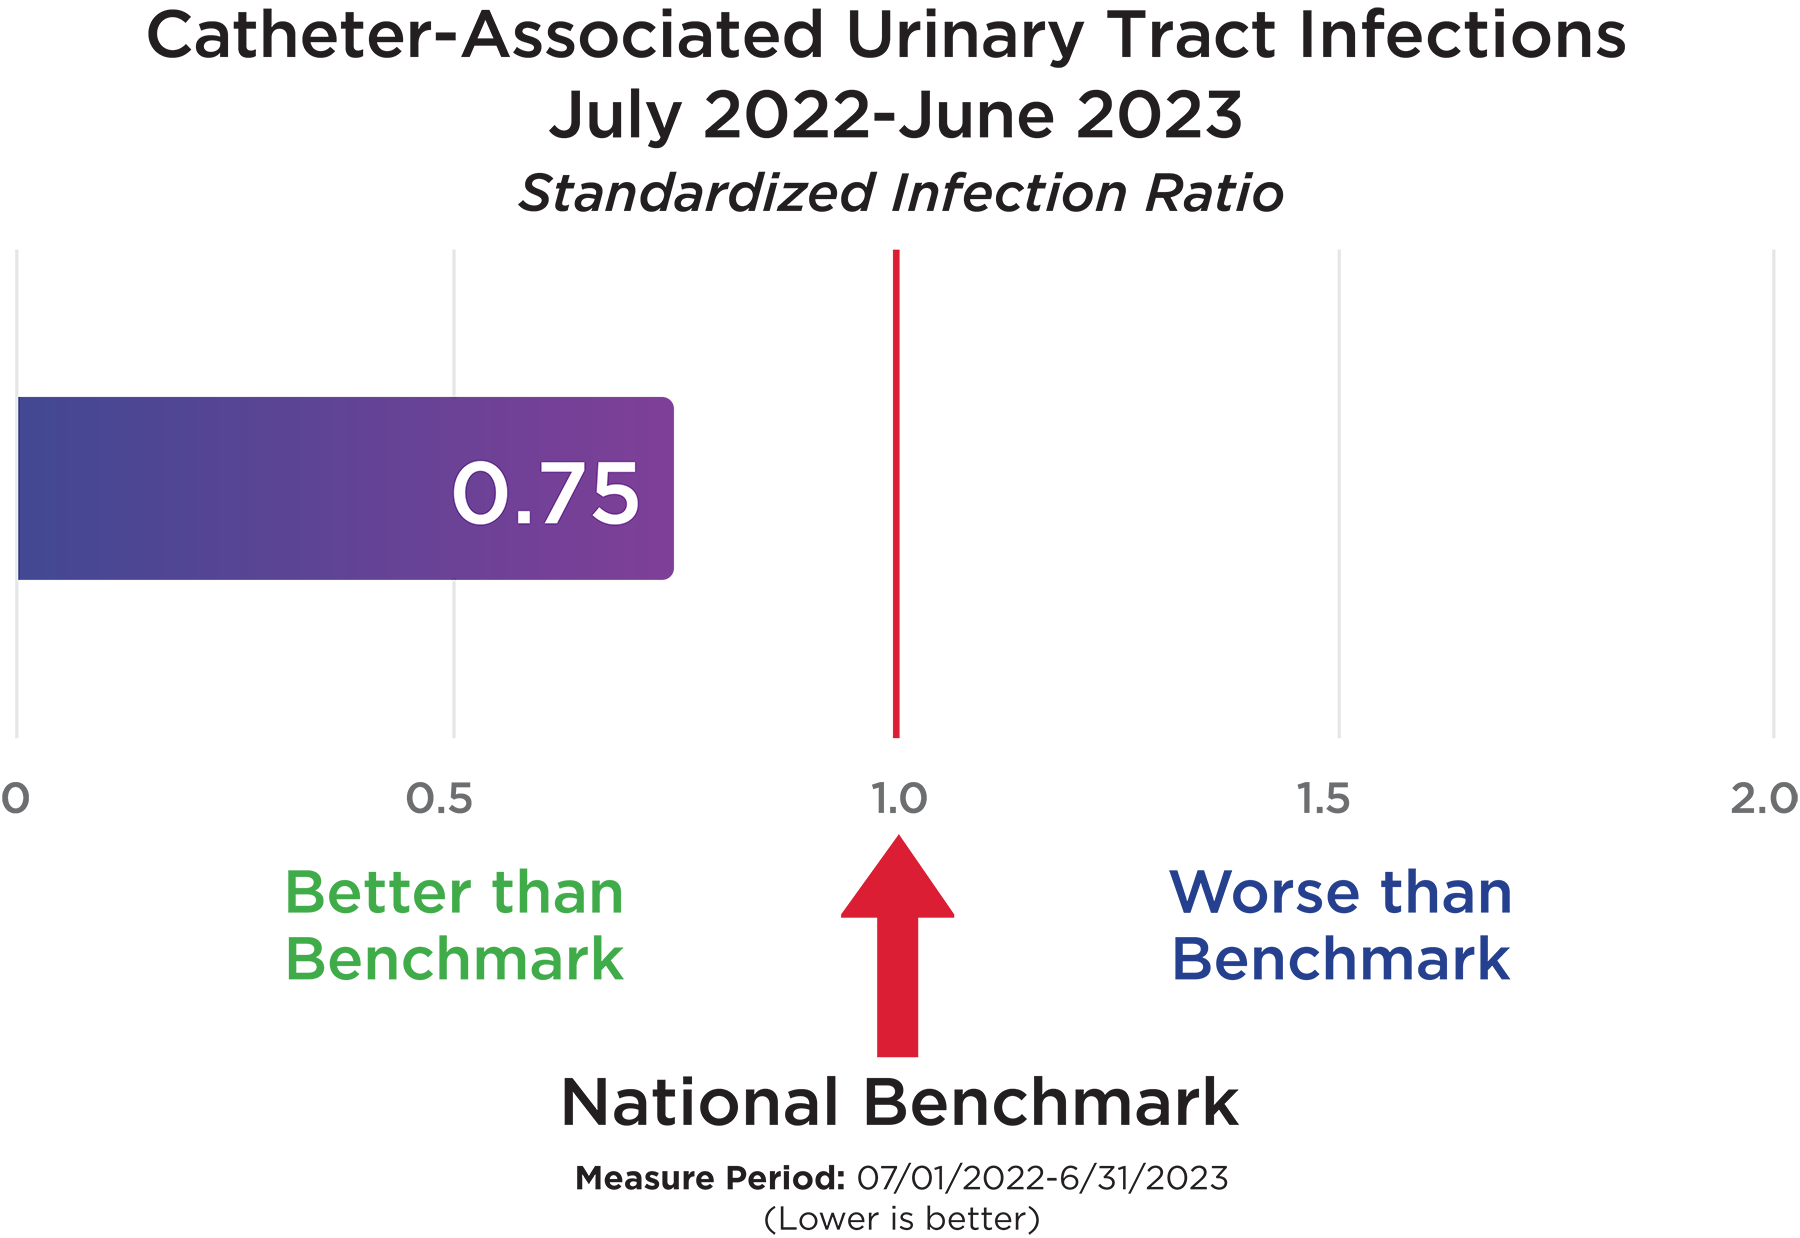 Catheter-Associated Urinary Tract Infections July 2022-June 2023